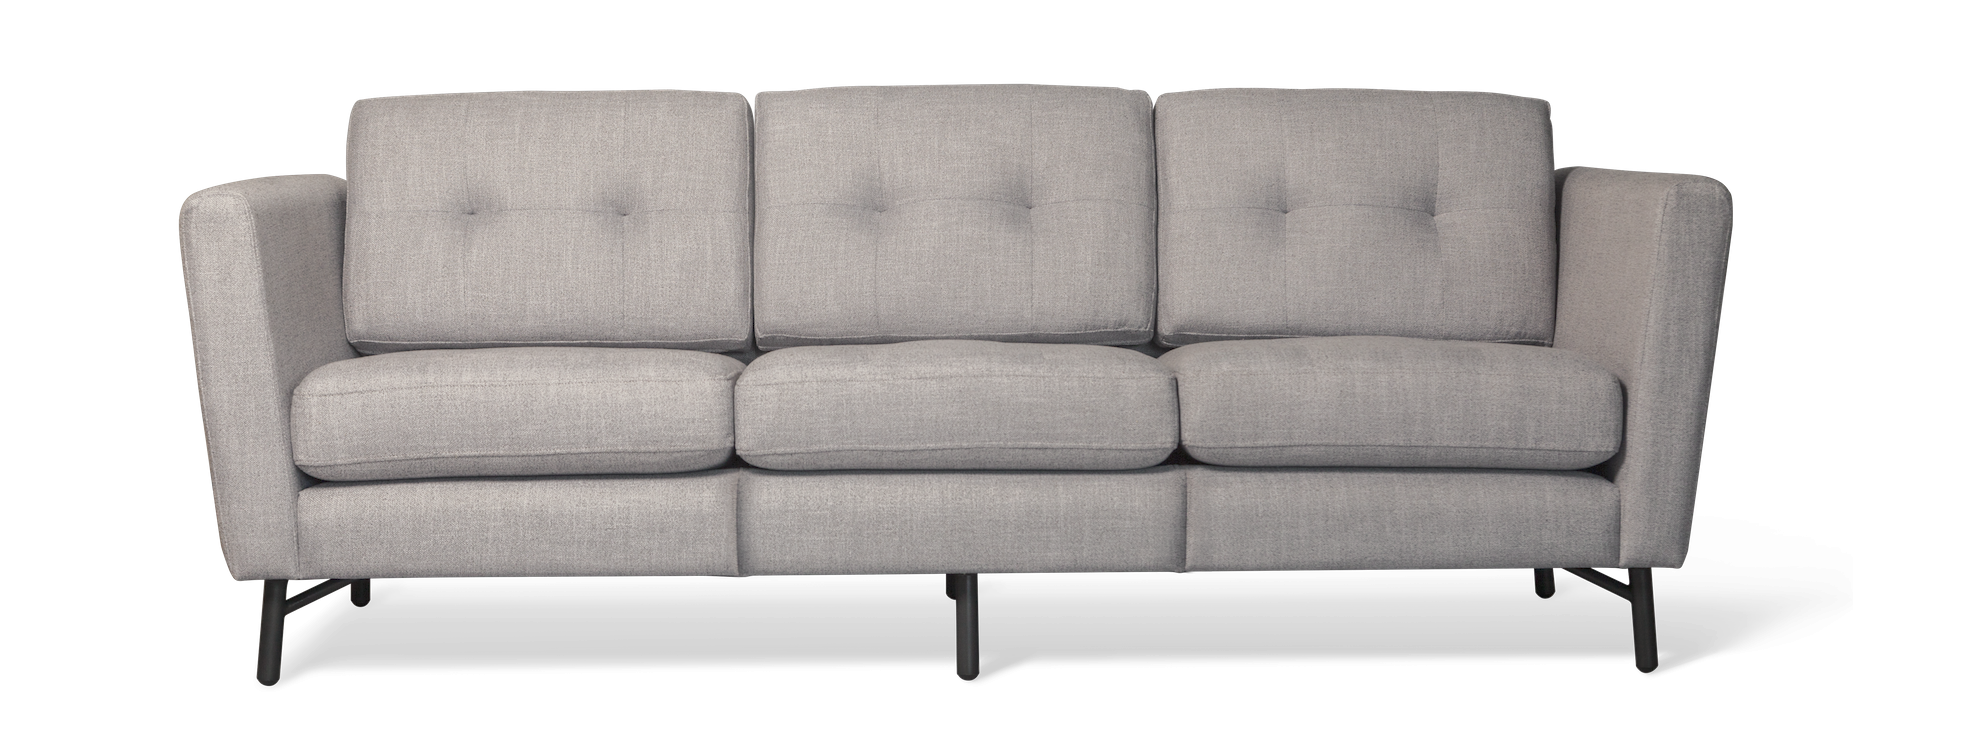 Couch PNG Picture pngteam.com